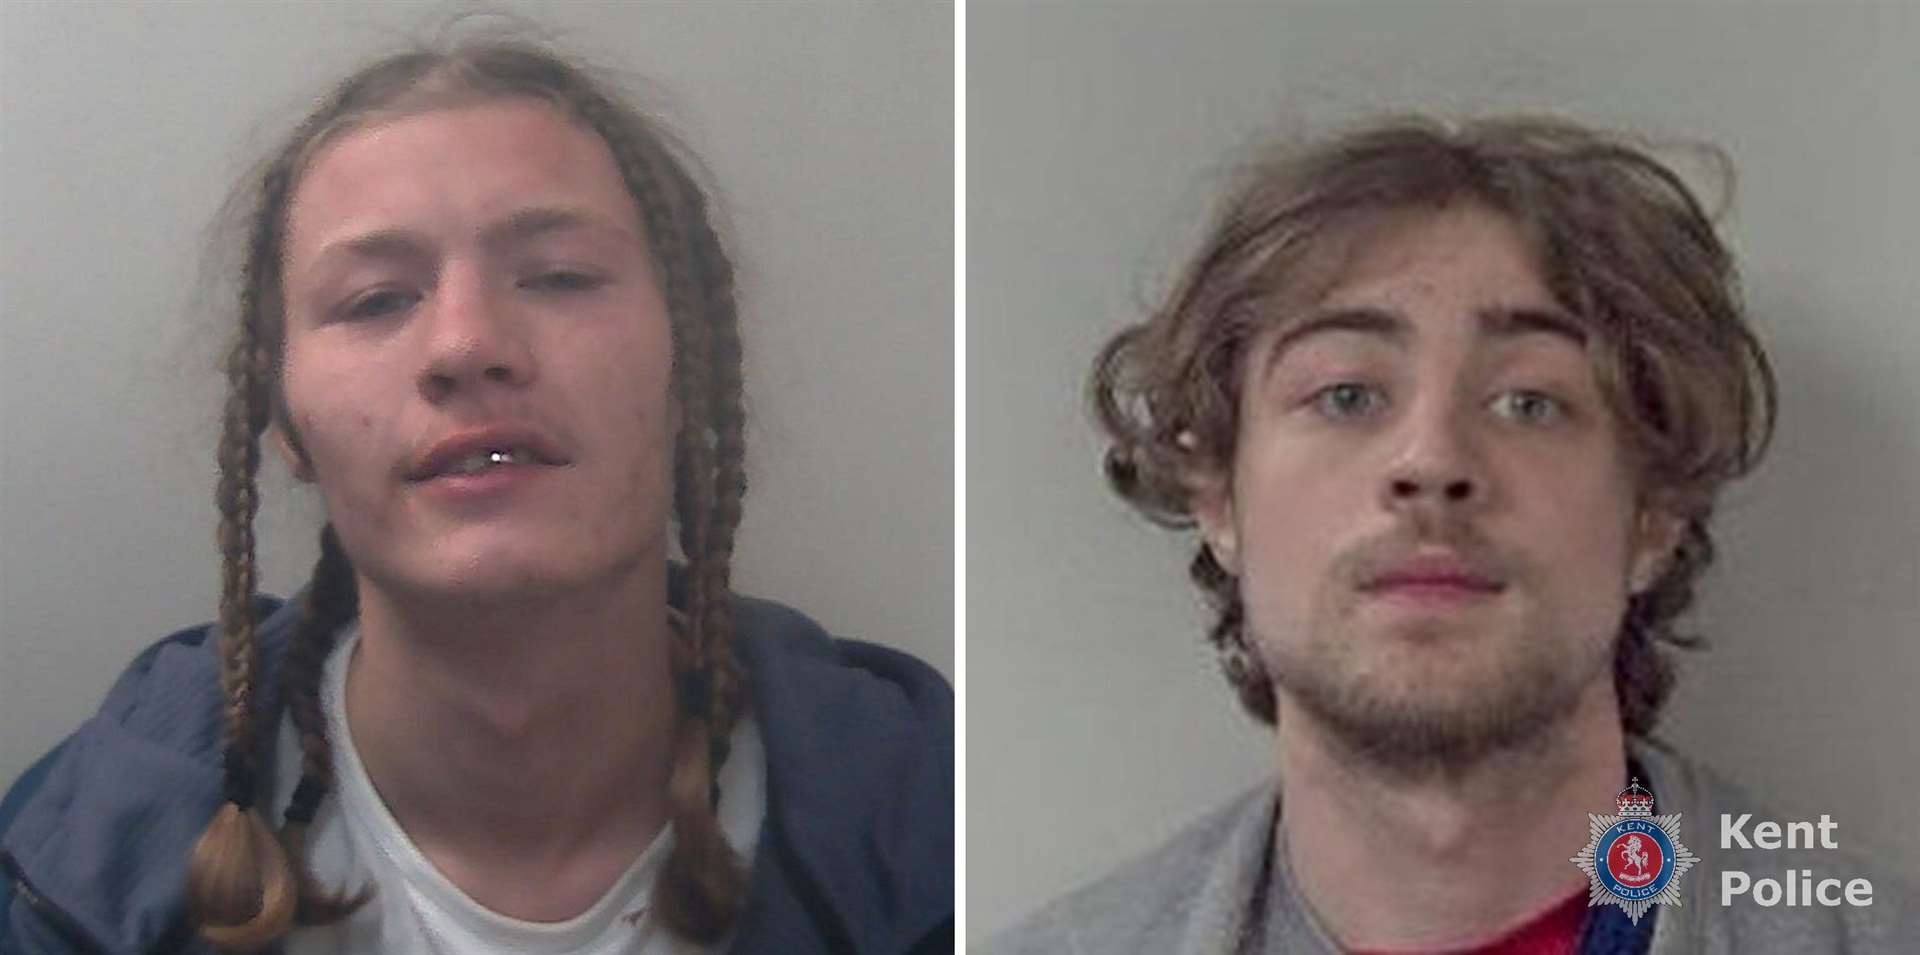 Jack Grindley, 21, and Leon Melson, 20, have been jailed after breaking into a property in Lauren Van Der Post Way in Ashford